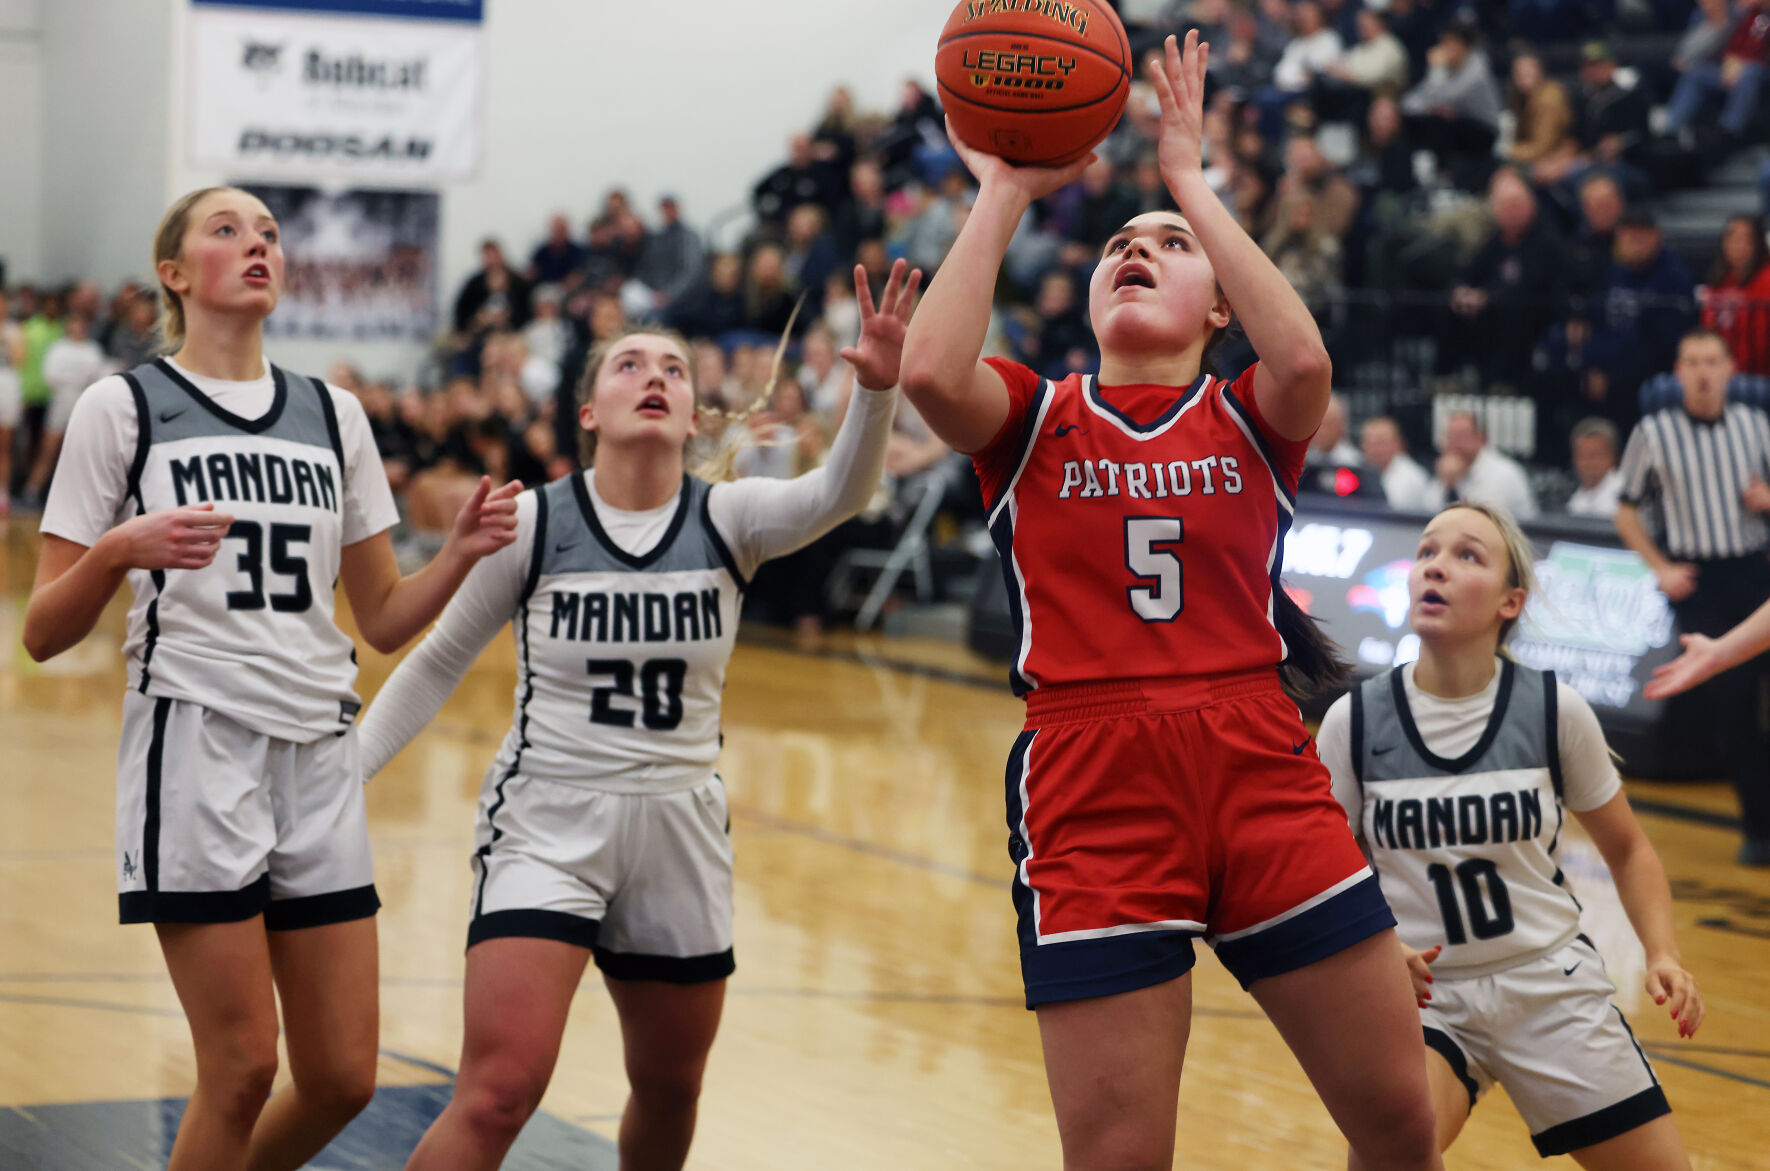 Century Patriots Secure 48-43 Win in Defensive Battle, Looks Ahead to Top-Five Showdown with Minot